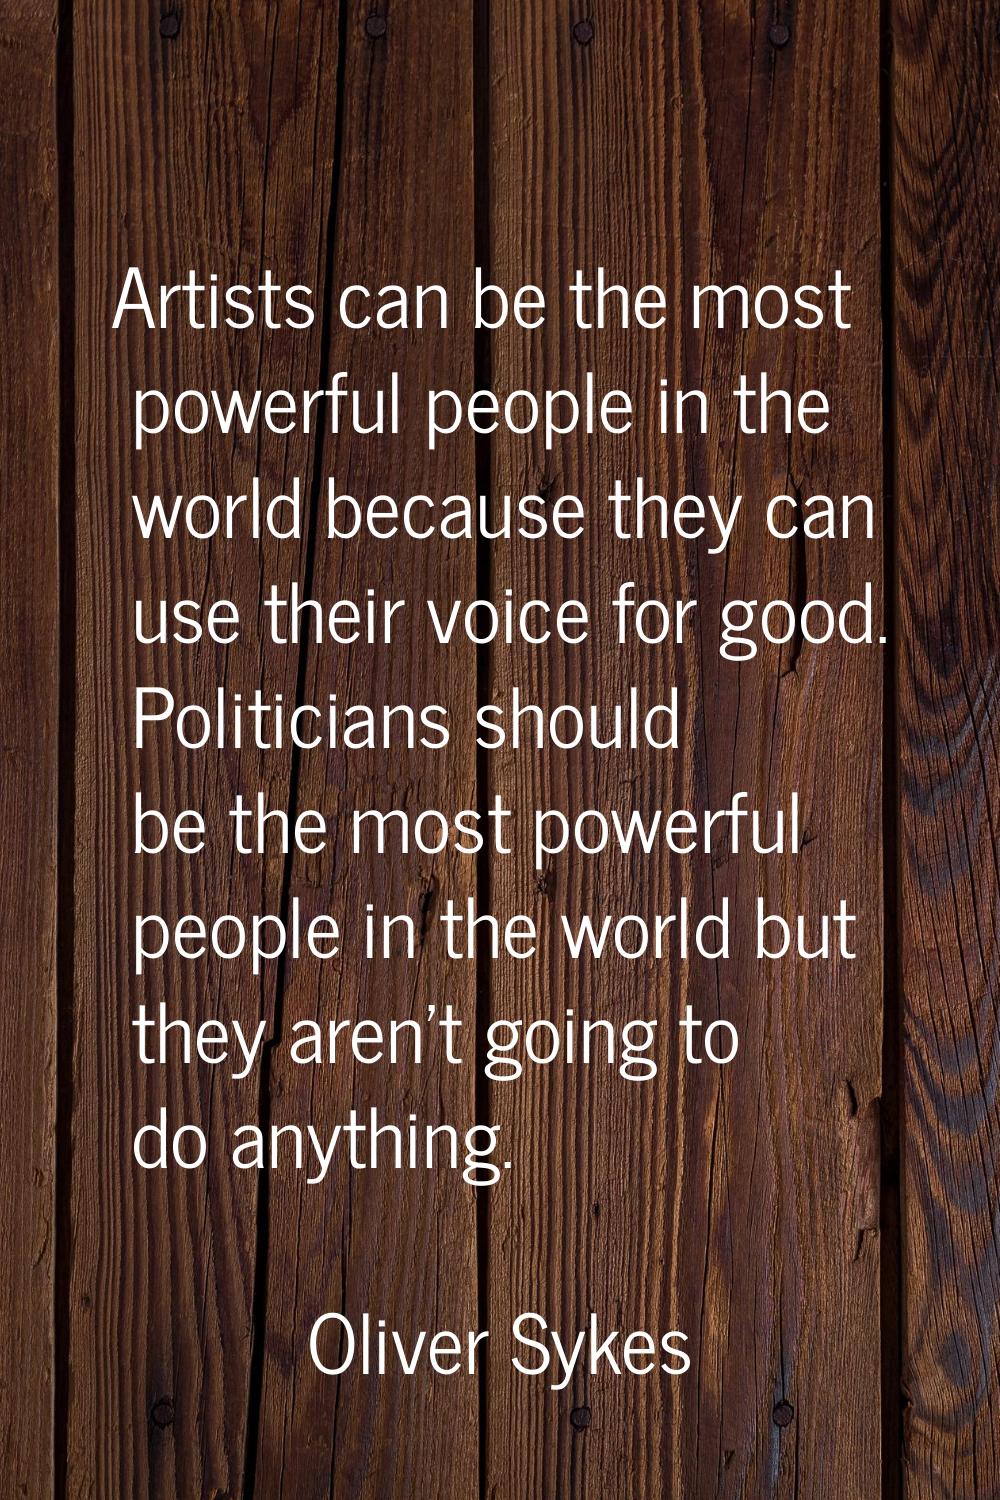 Artists can be the most powerful people in the world because they can use their voice for good. Pol